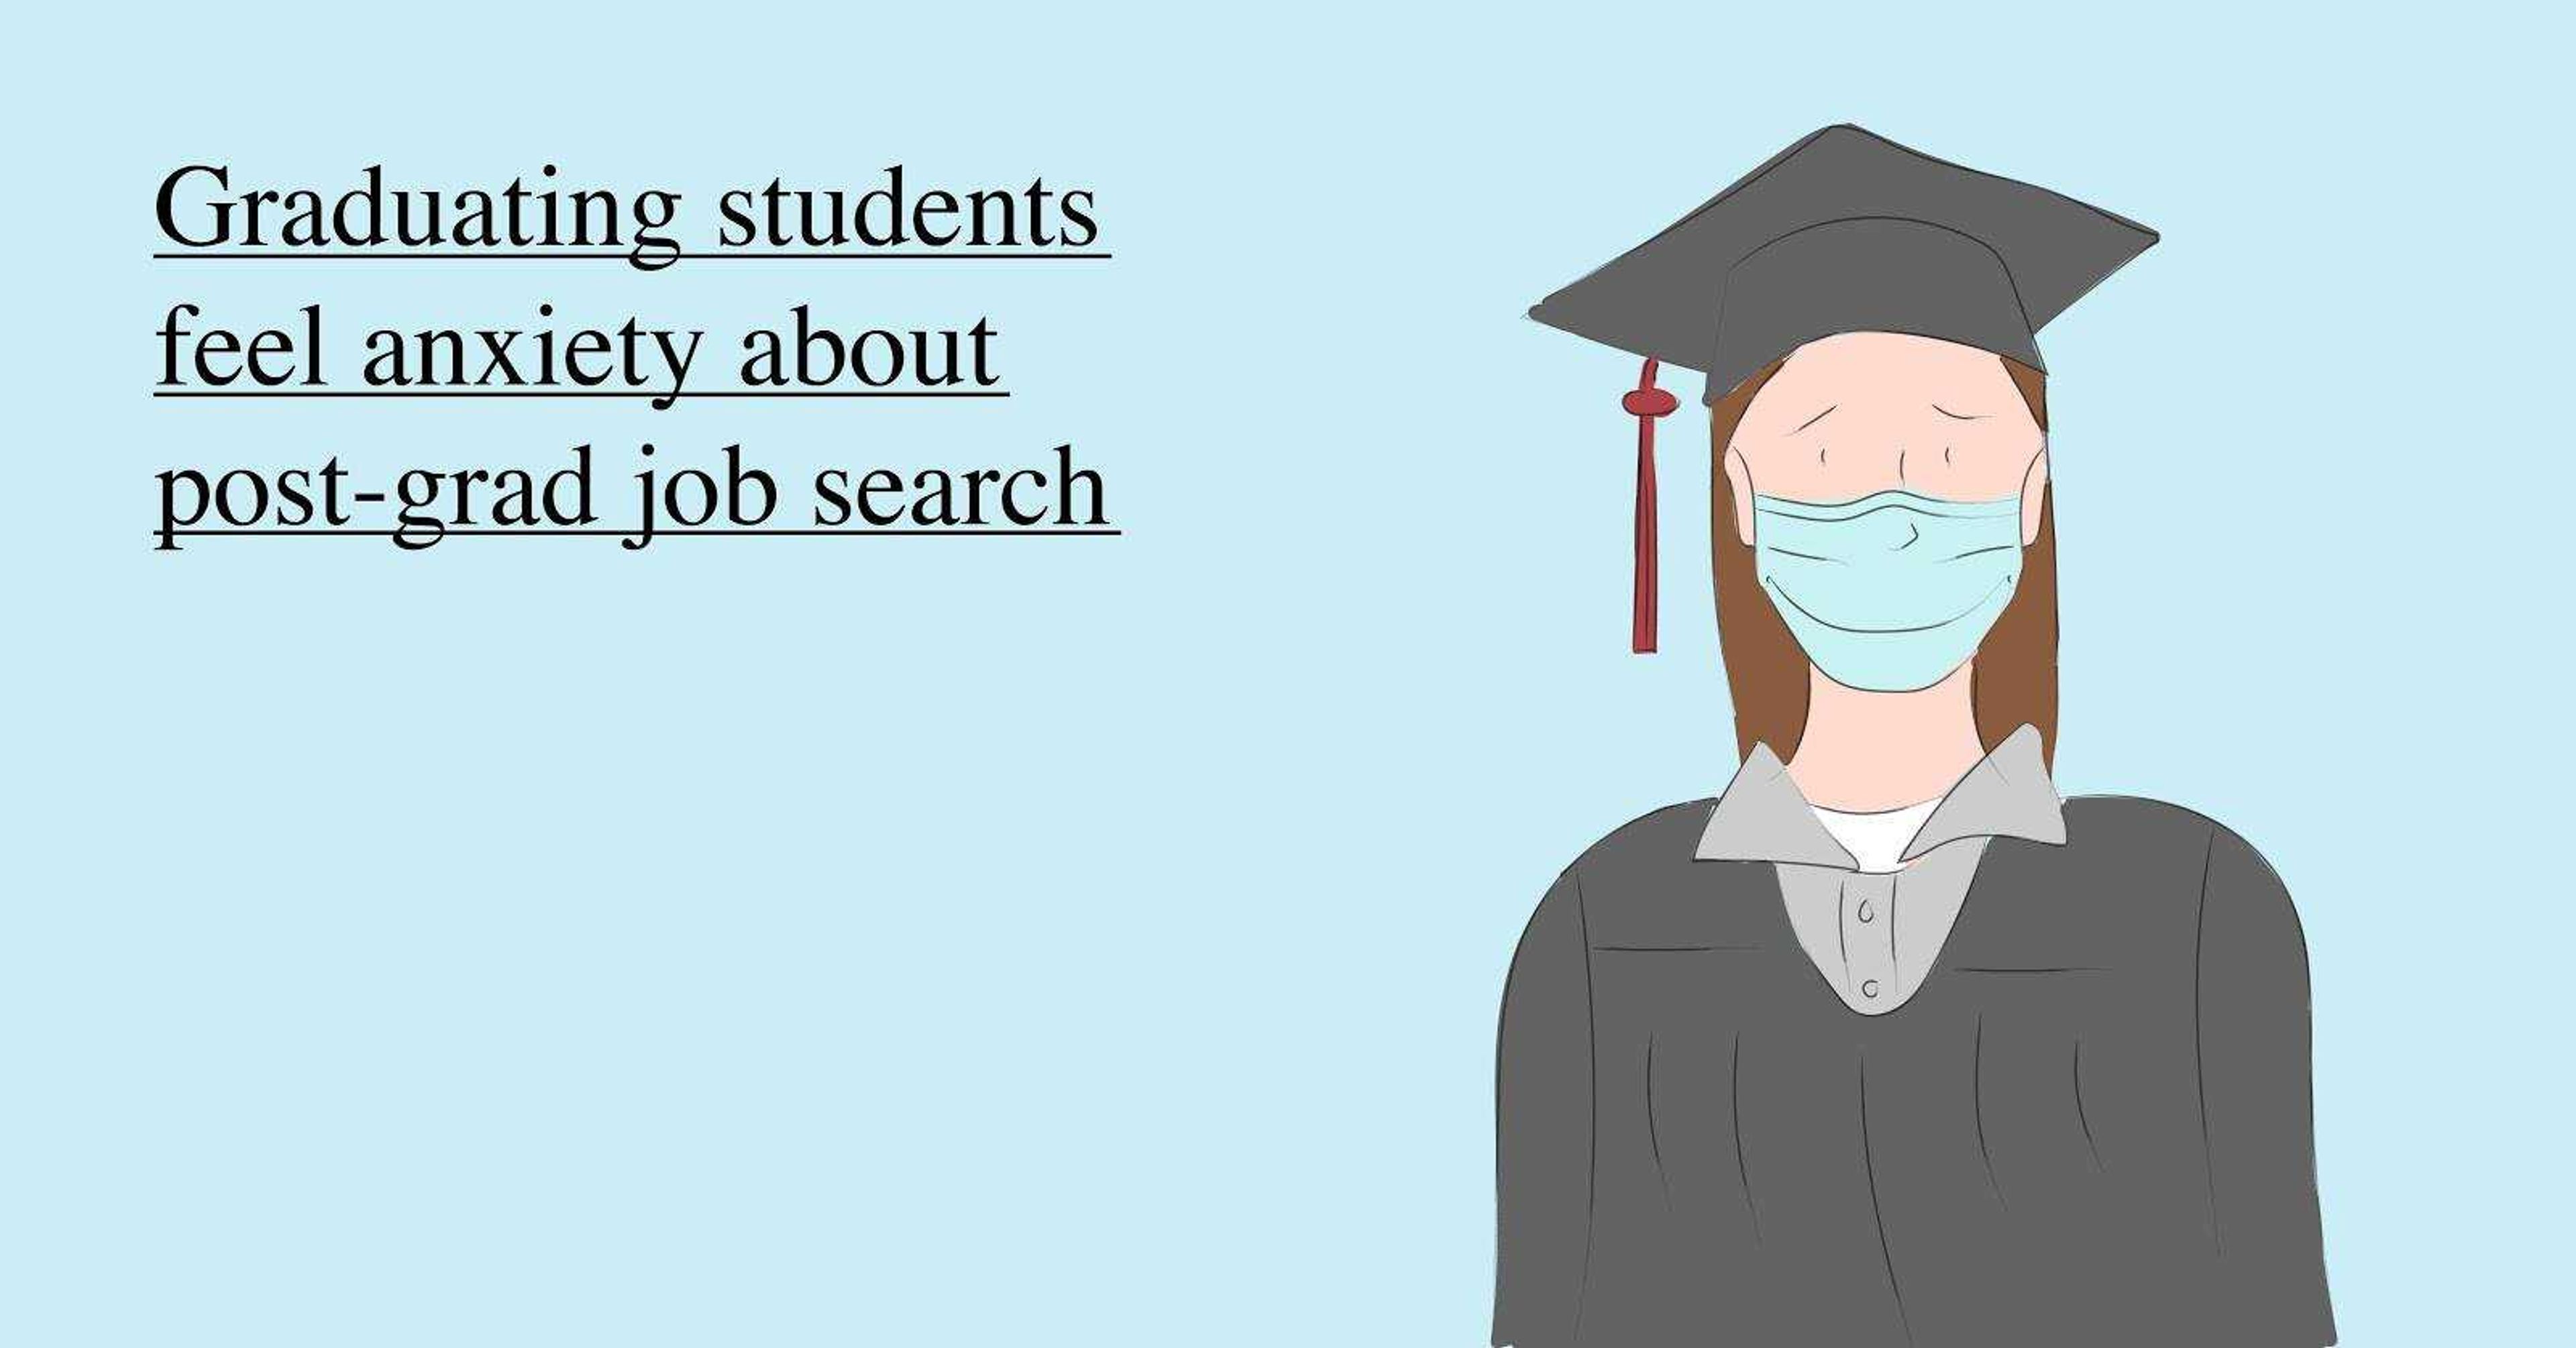 Graduating students feel anxious about post-grad job search